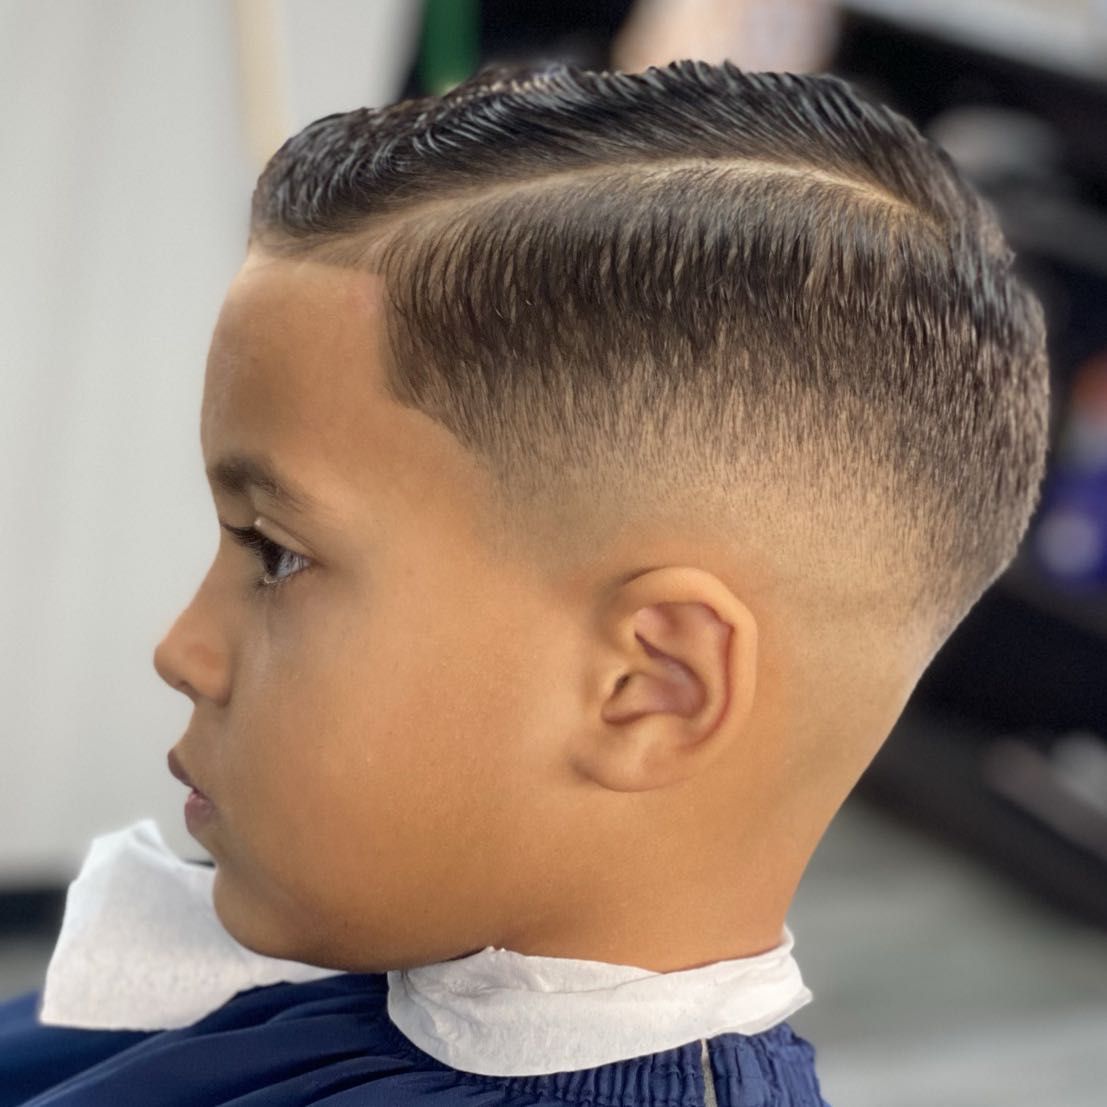 Kids haircut (bald fades, ages 10 and under) portfolio